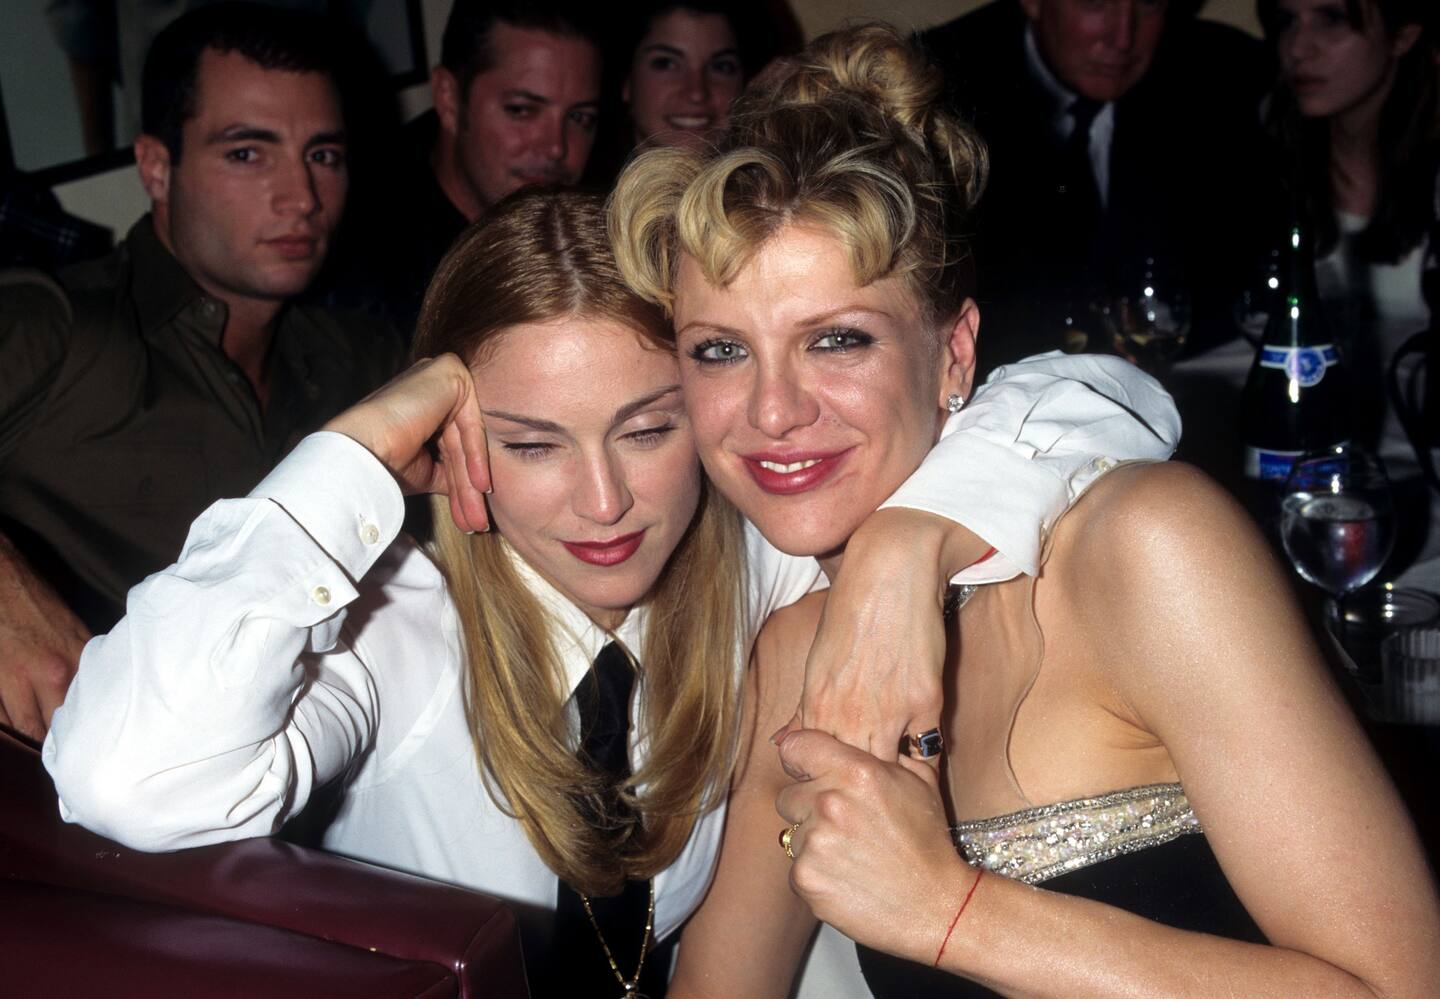 Madonna and Courtney Love at the Maverick party in 1997. Photo / Getty Images